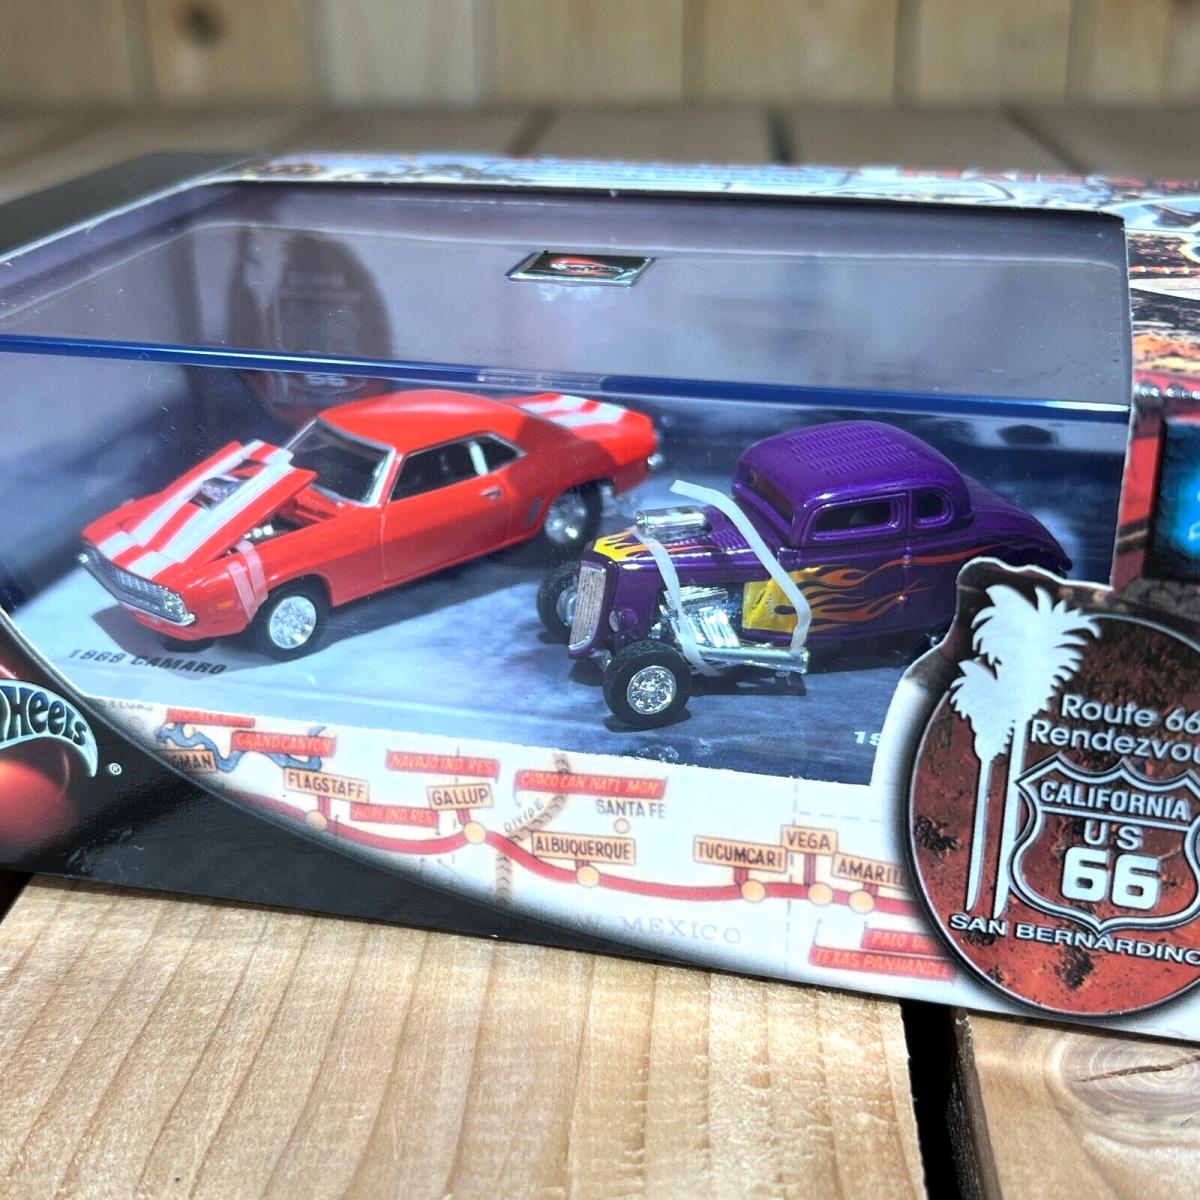 Hot Wheels Route 66 Rendezvous 1969 Camaro 1934 Ford 1:64 Diecast 2 Car Set